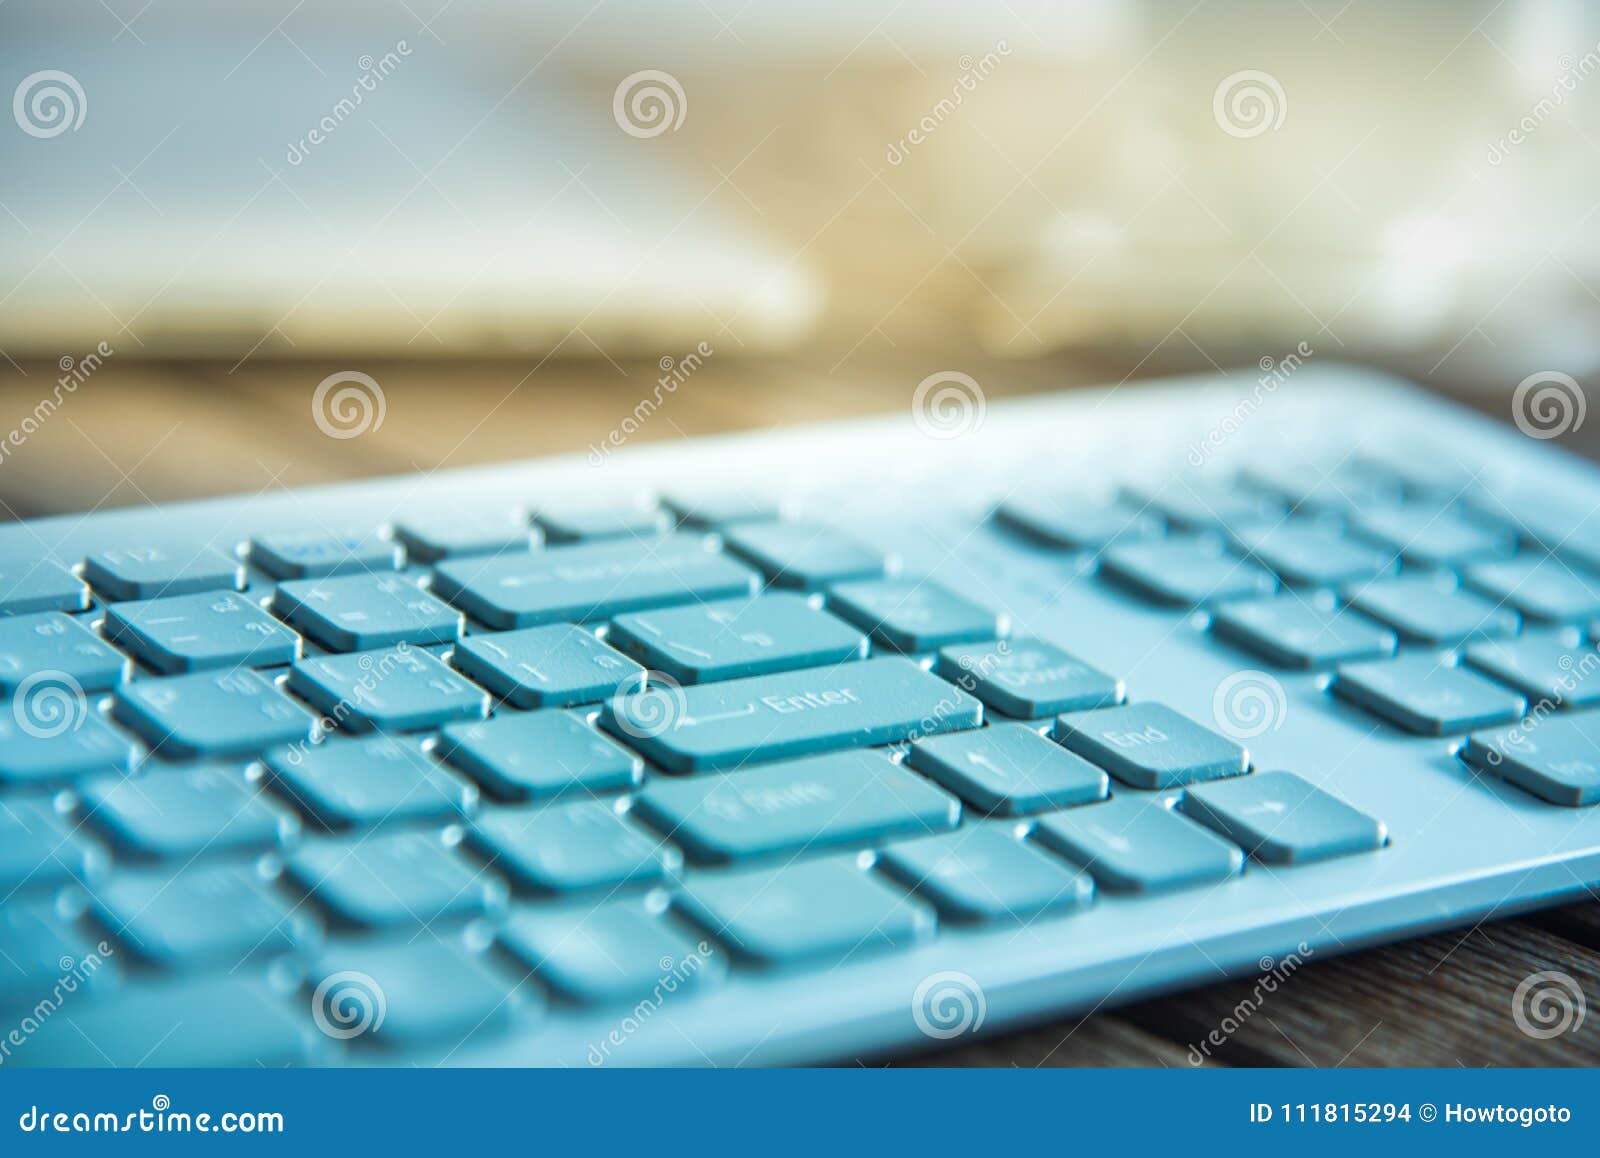 pc keyboard and cup of coffee on old weathering wooden table